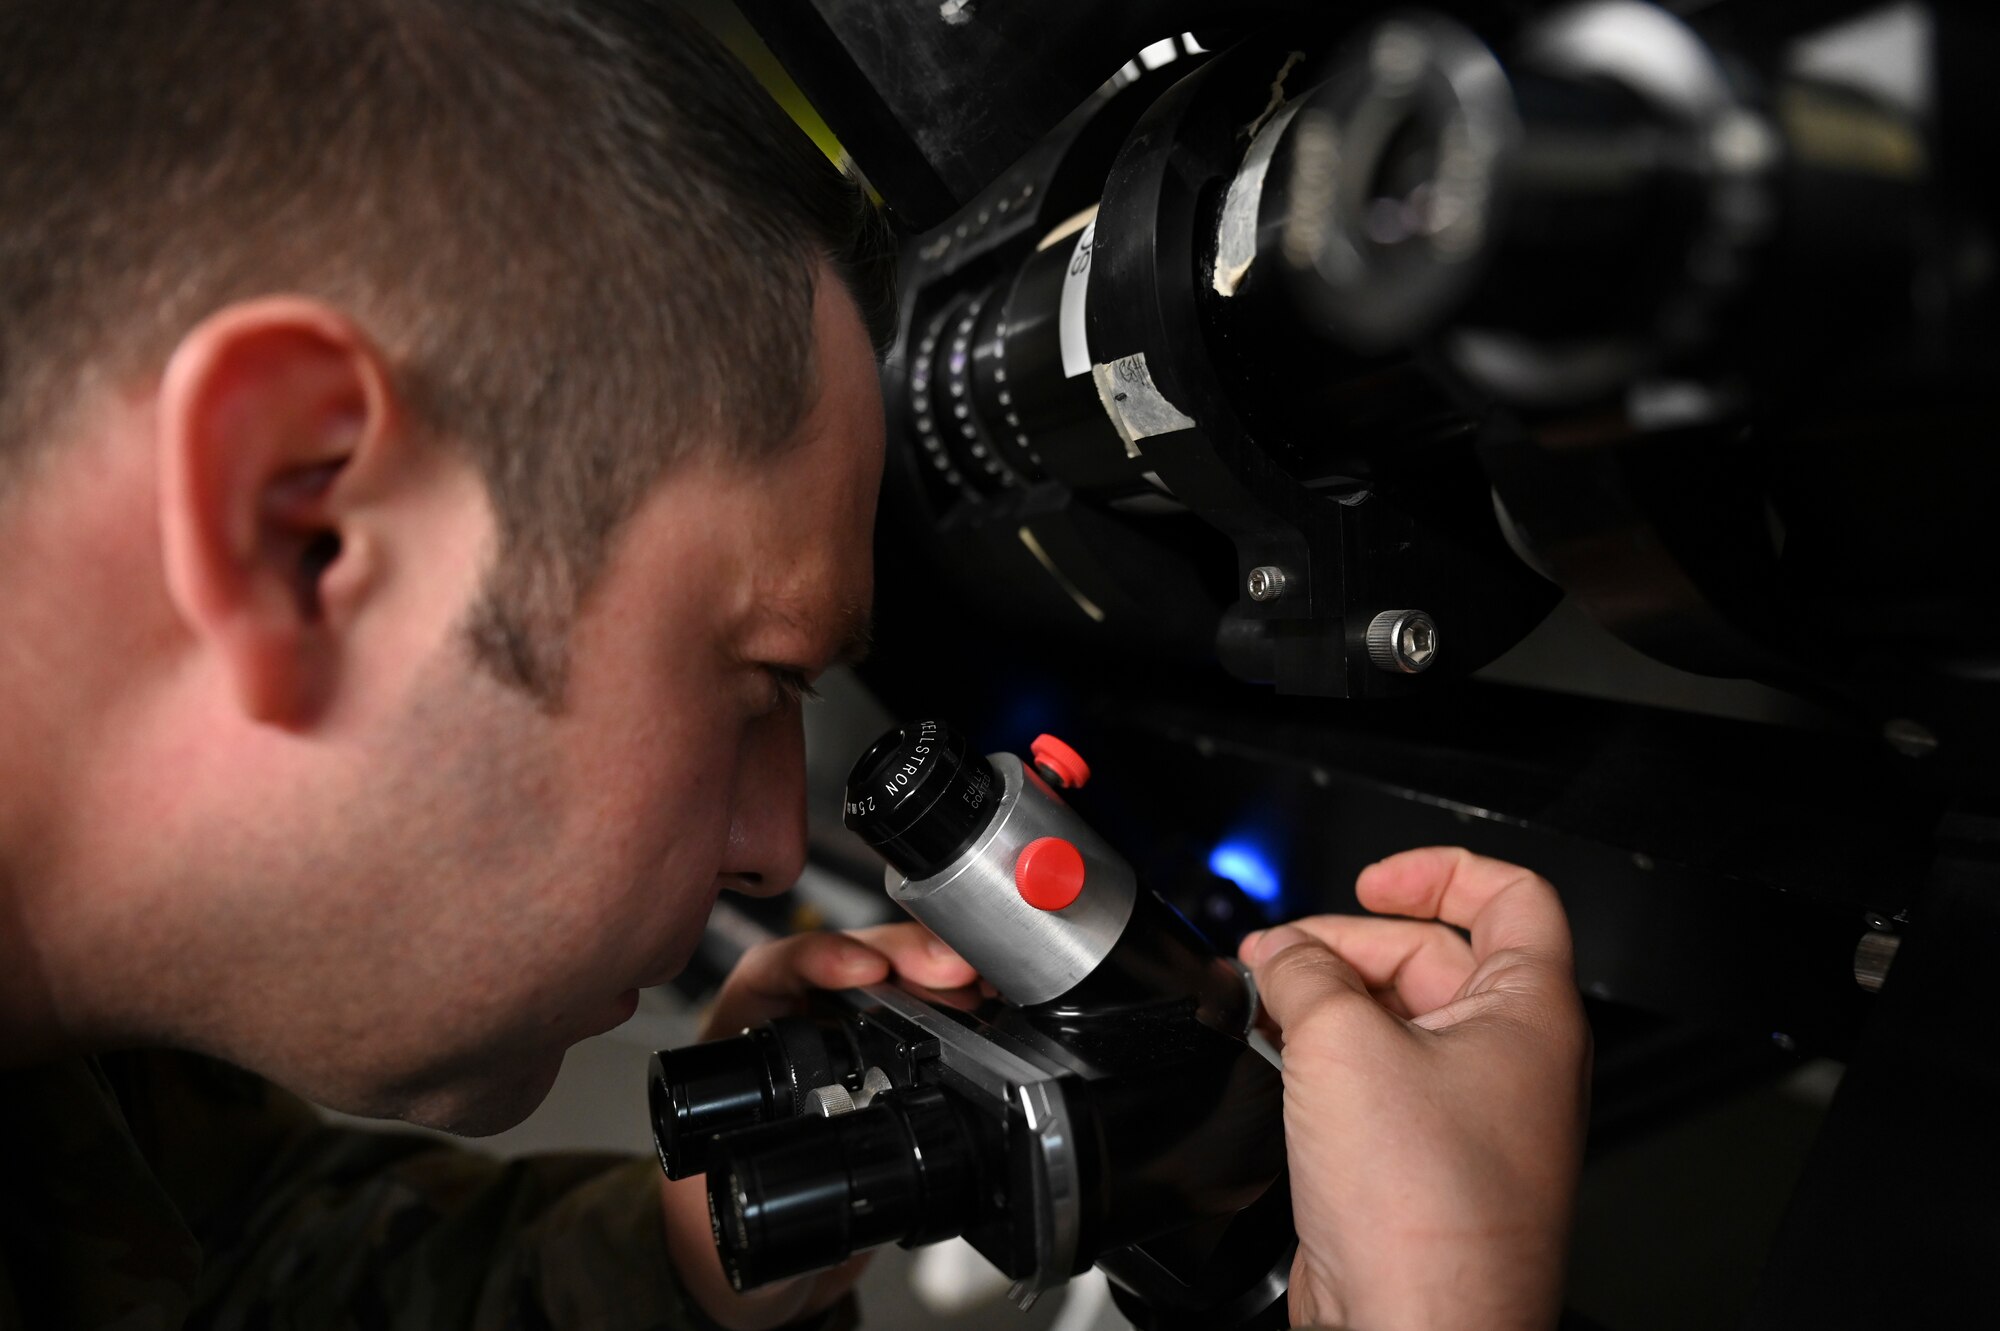 U.S. Air Force Tech. Sgt. Sergio Martinez, 2nd Weather Squadron radar airfield and weather systems noncommissioned officer in charge, looks through the eyepiece of the observatory telescope at Holloman Air Force Base, New Mexico, Jan. 6, 2023. The eyepiece provides Airmen of the 2nd WS a direct line of sight to solar activities visible to the naked eye. (U.S. Air Force photo by Airman 1st Class Isaiah Pedrazzini)